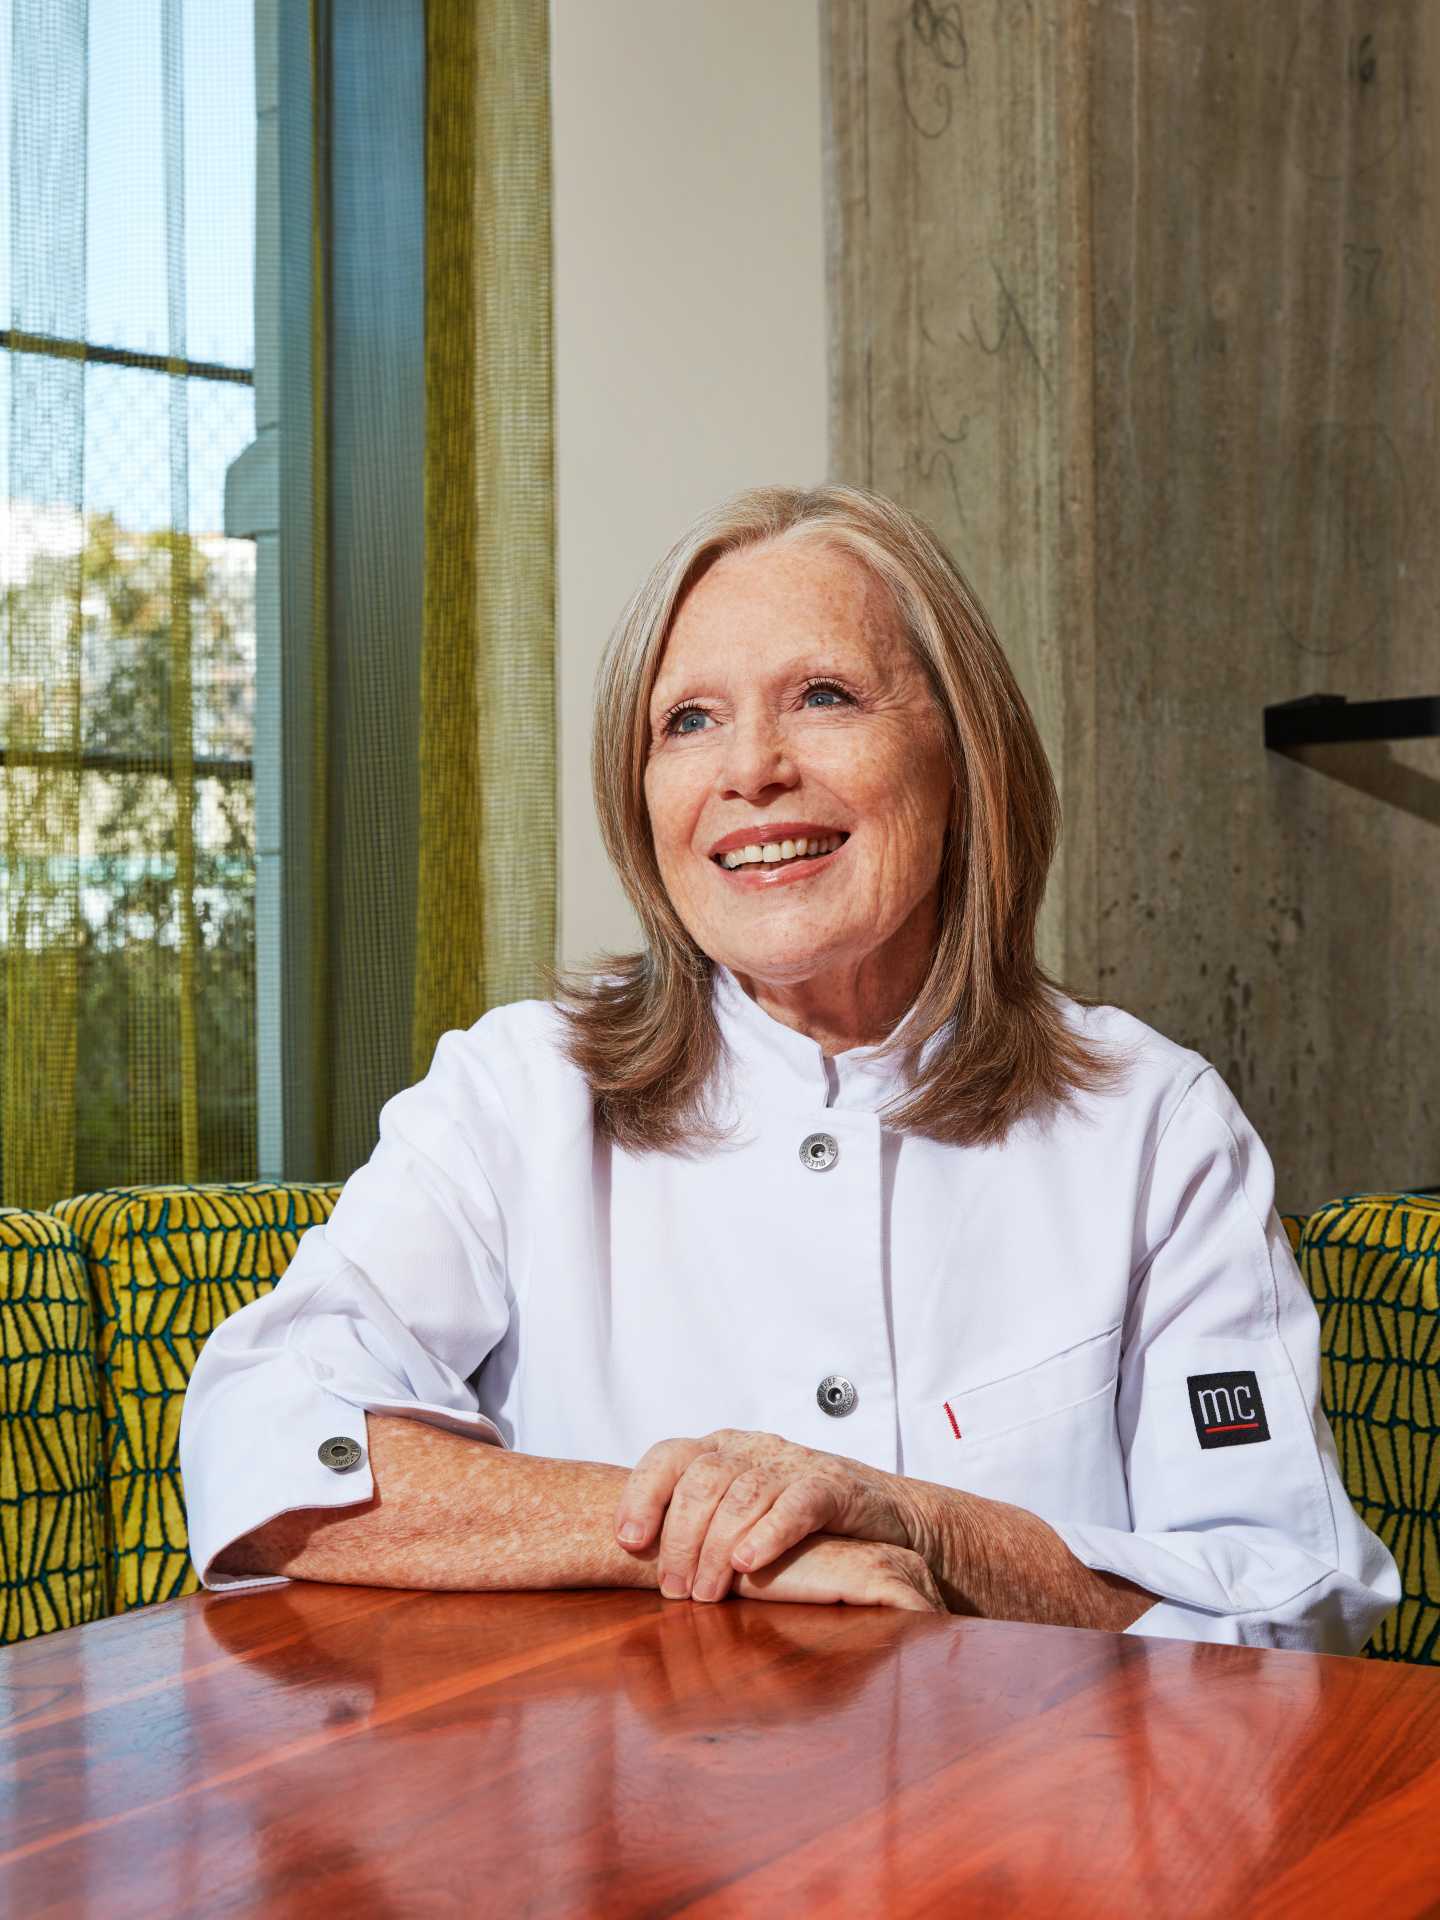 Mildred's Temple Kitchen | Donna Dooher, chef and owner of Mildred's Temple Kitchen